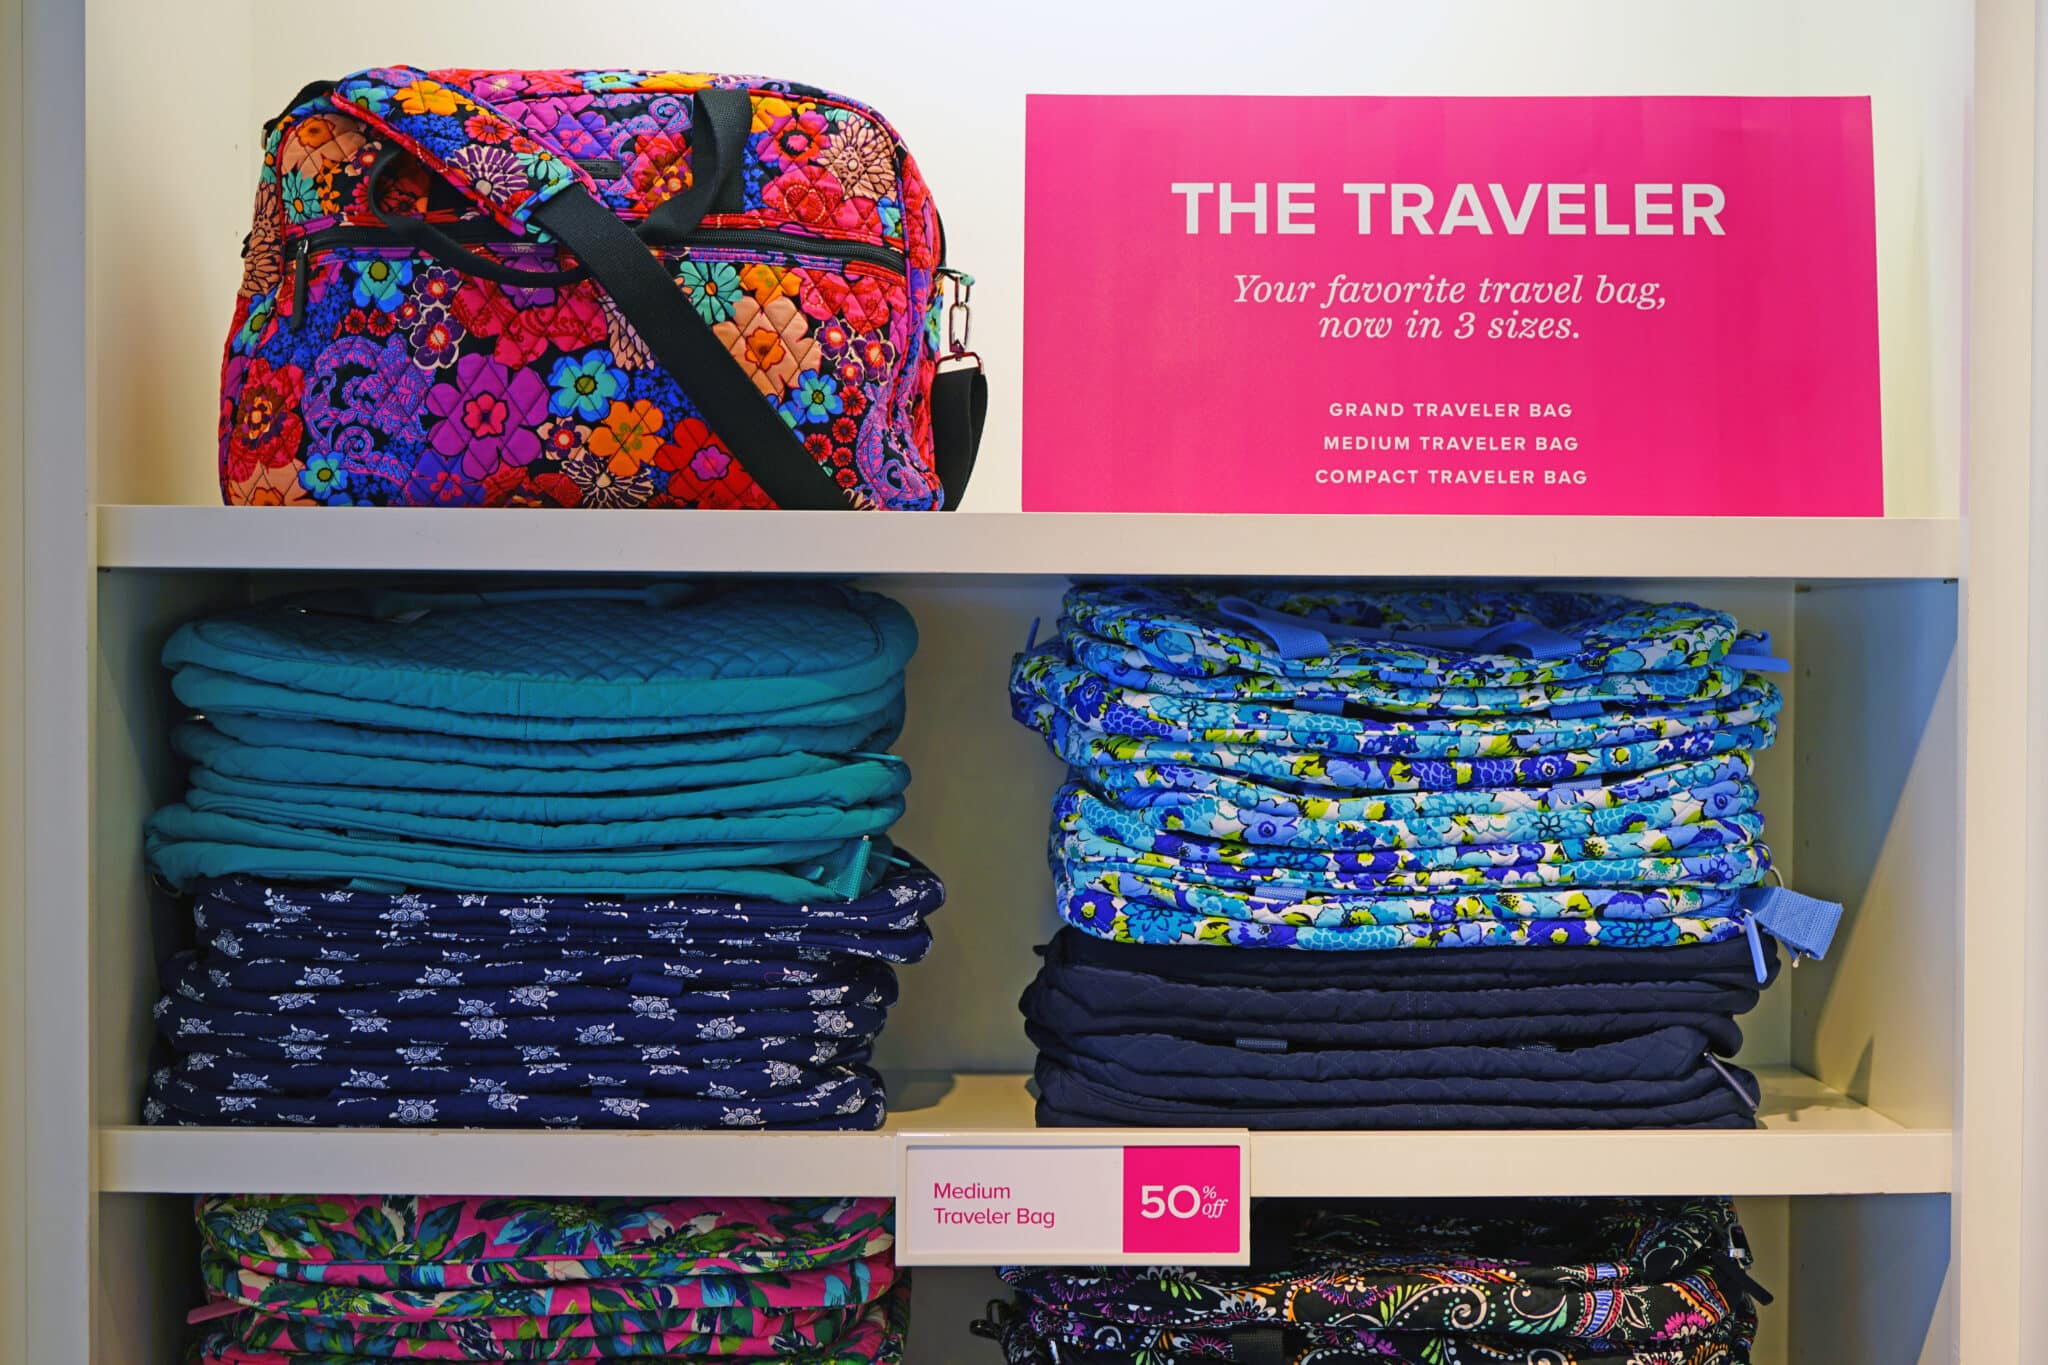 Shelves displaying various colorful bags. The top shelf features a floral-patterned travel bag, next to a pink sign reading "The Traveler: Your favorite travel bag, now in 3 sizes." Iconic Vera Bradley folded travel bags fill the lower shelves, accompanied by a sign reading "Medium Traveler Bag - 50% Off.